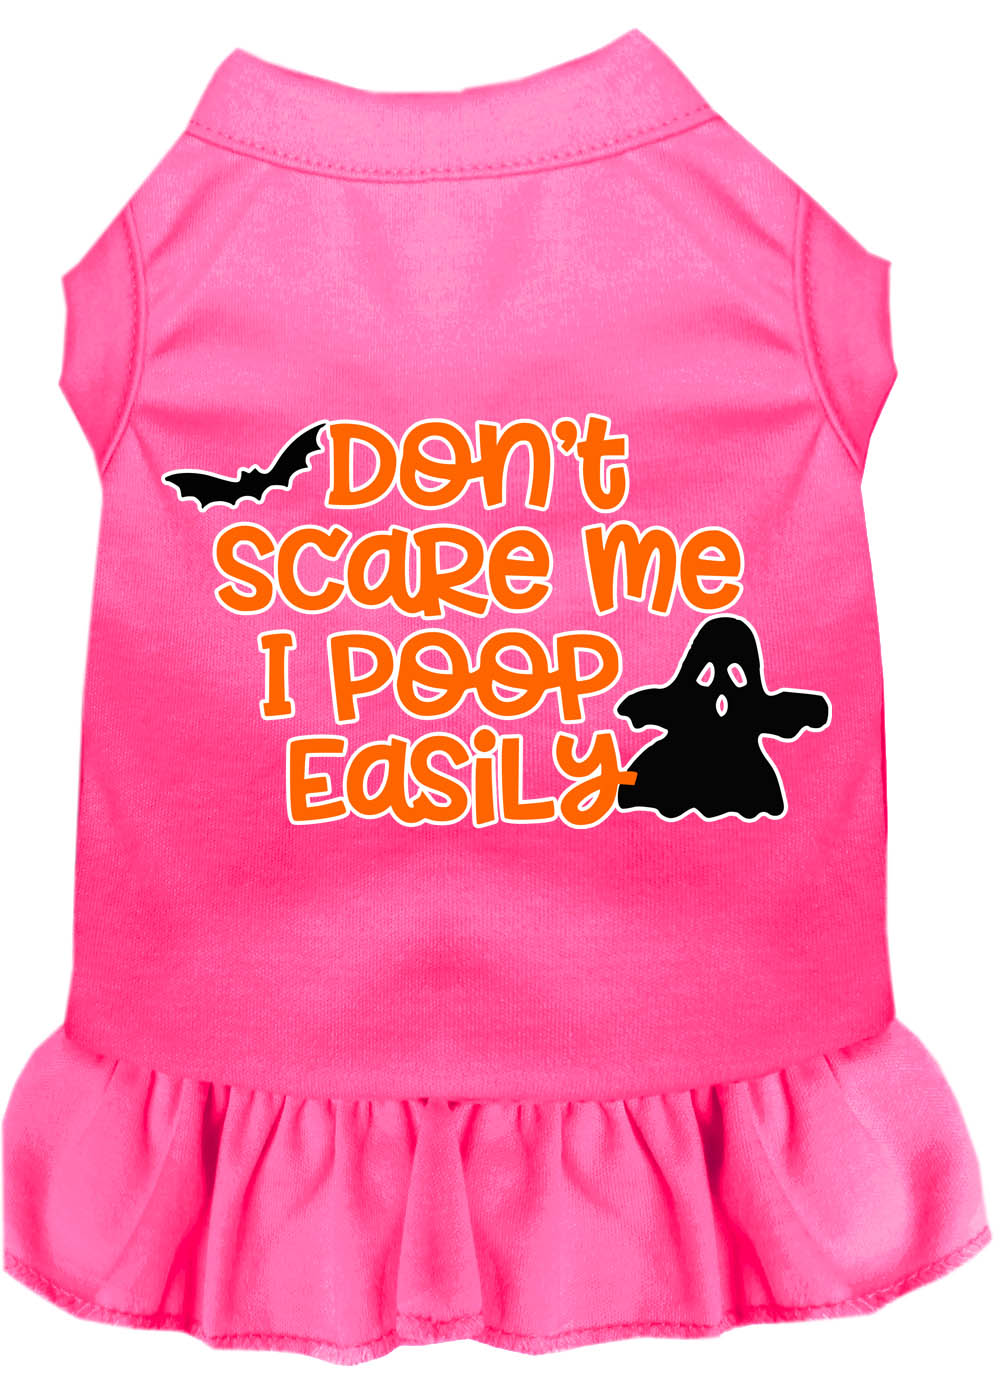 Don't Scare Me, Poops Easily Screen Print Dog Dress Bright Pink XXXL